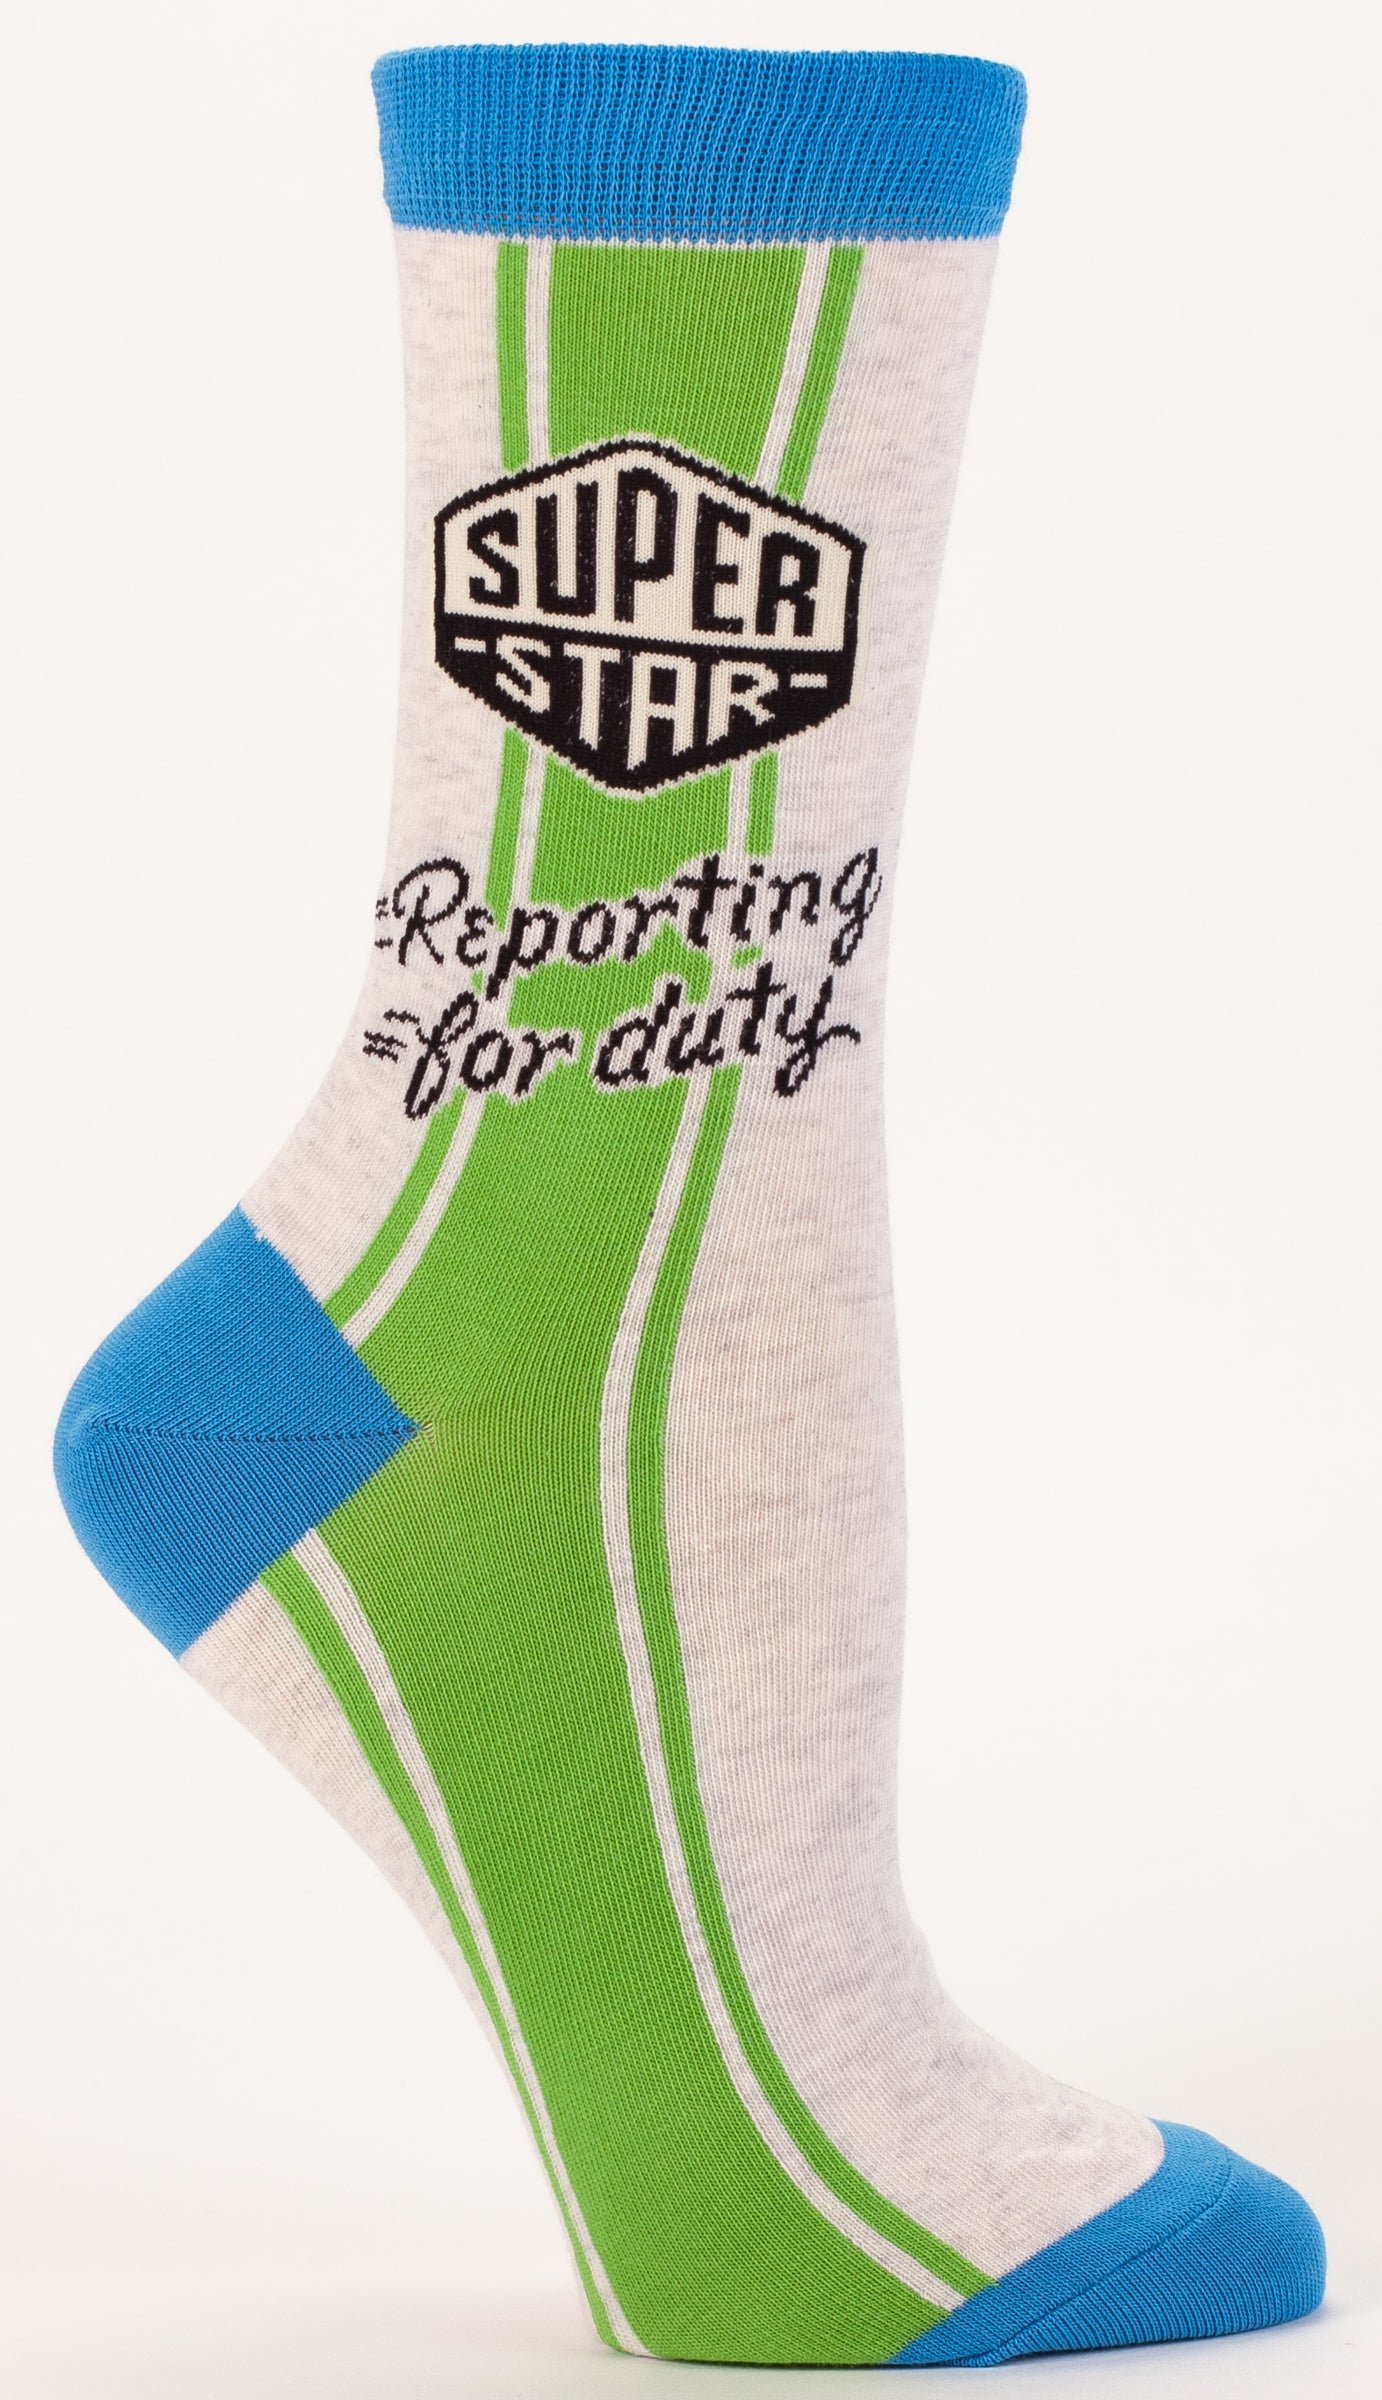 Woman's novelty fun crew sock with legend: "Superstar Reporting For Duty"